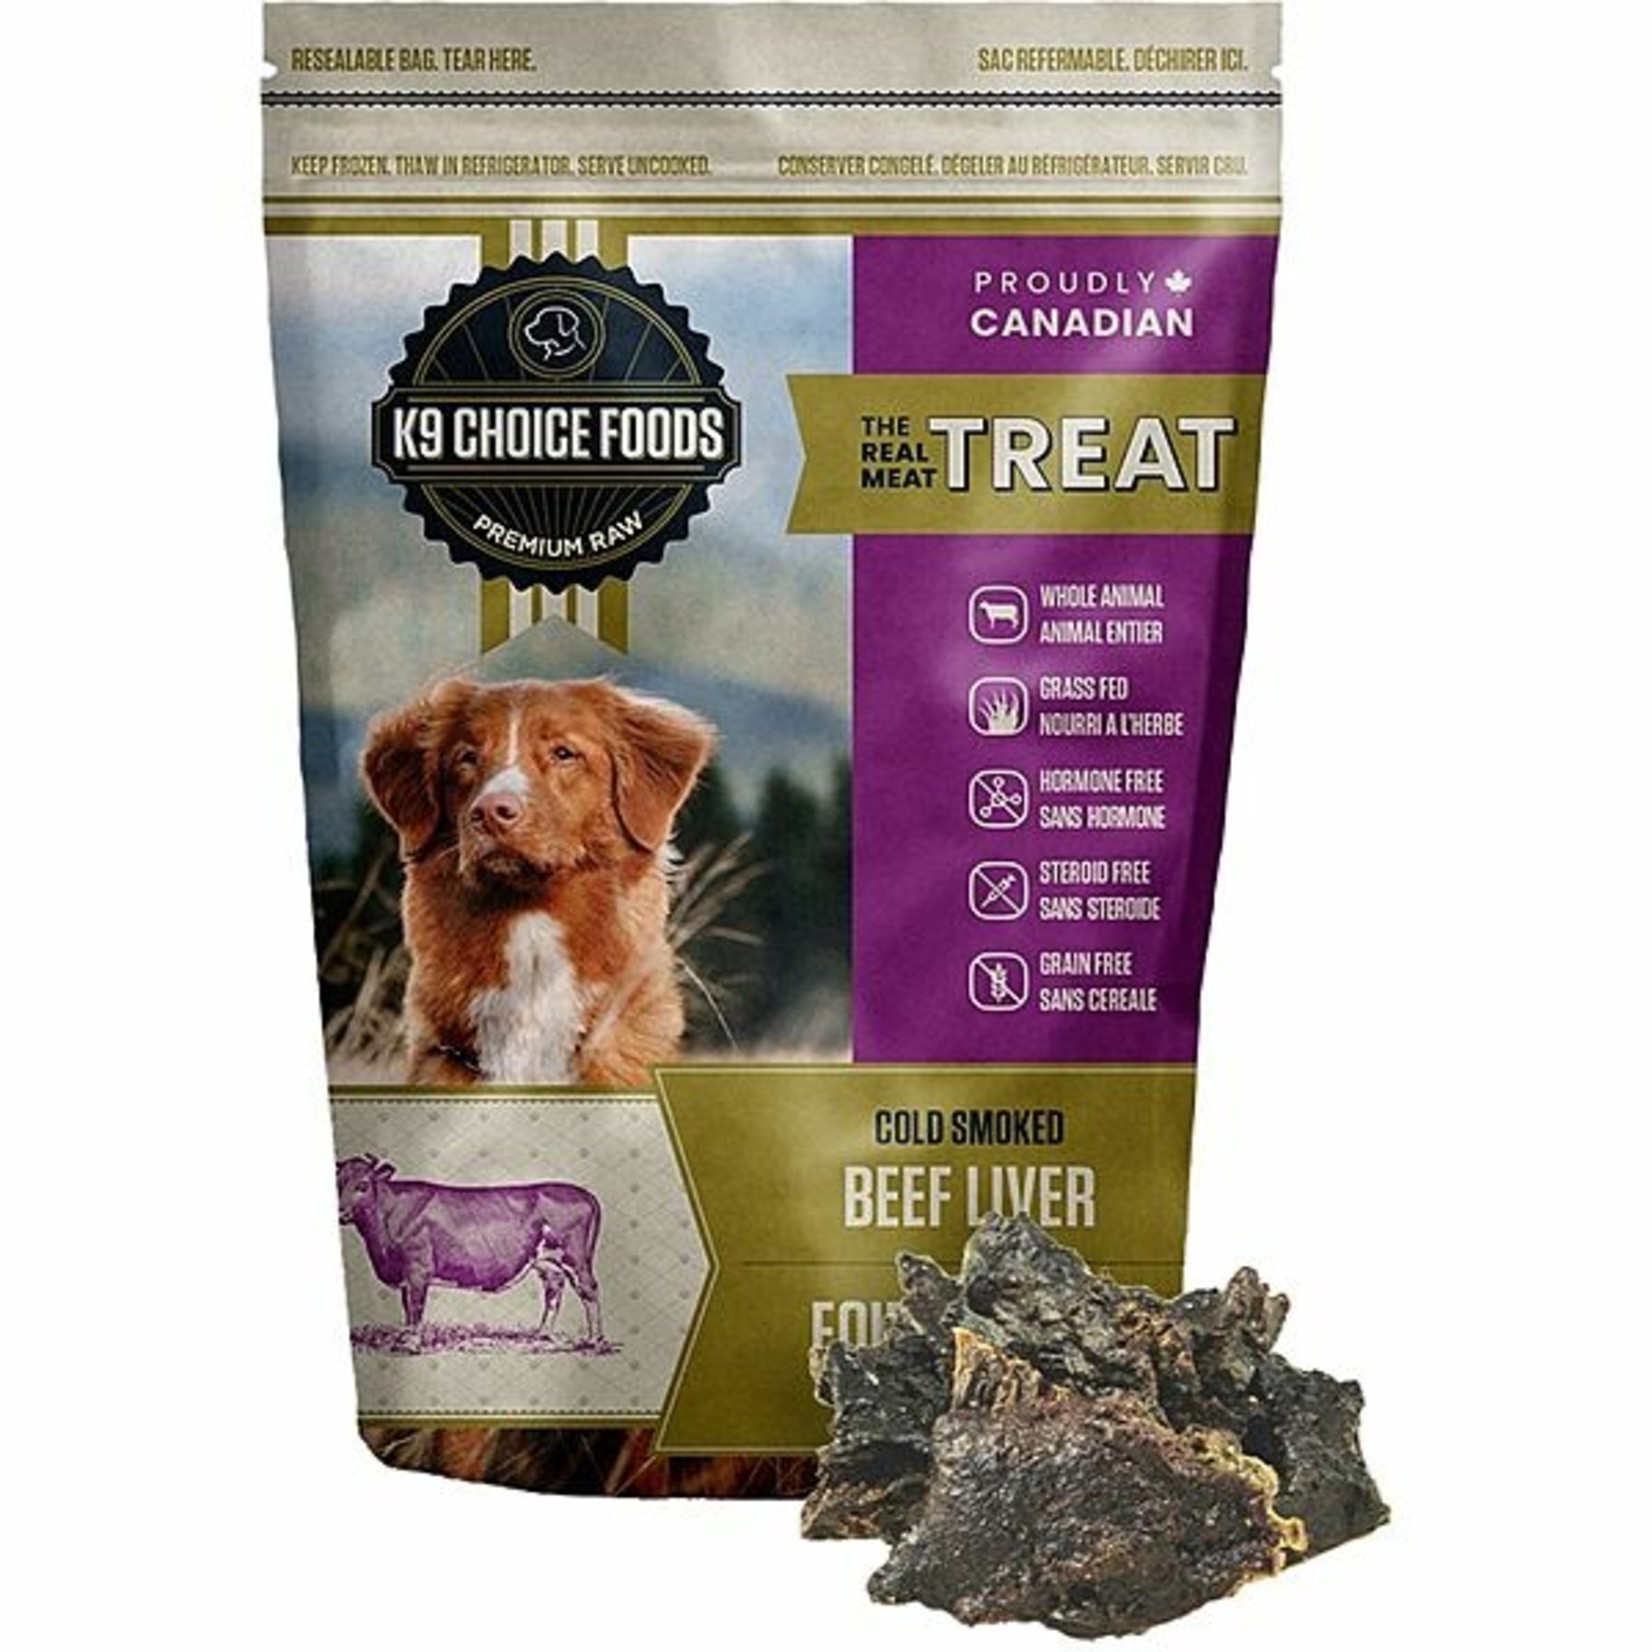 K9 Choice Frozen Smoked Beef Liver 227gm